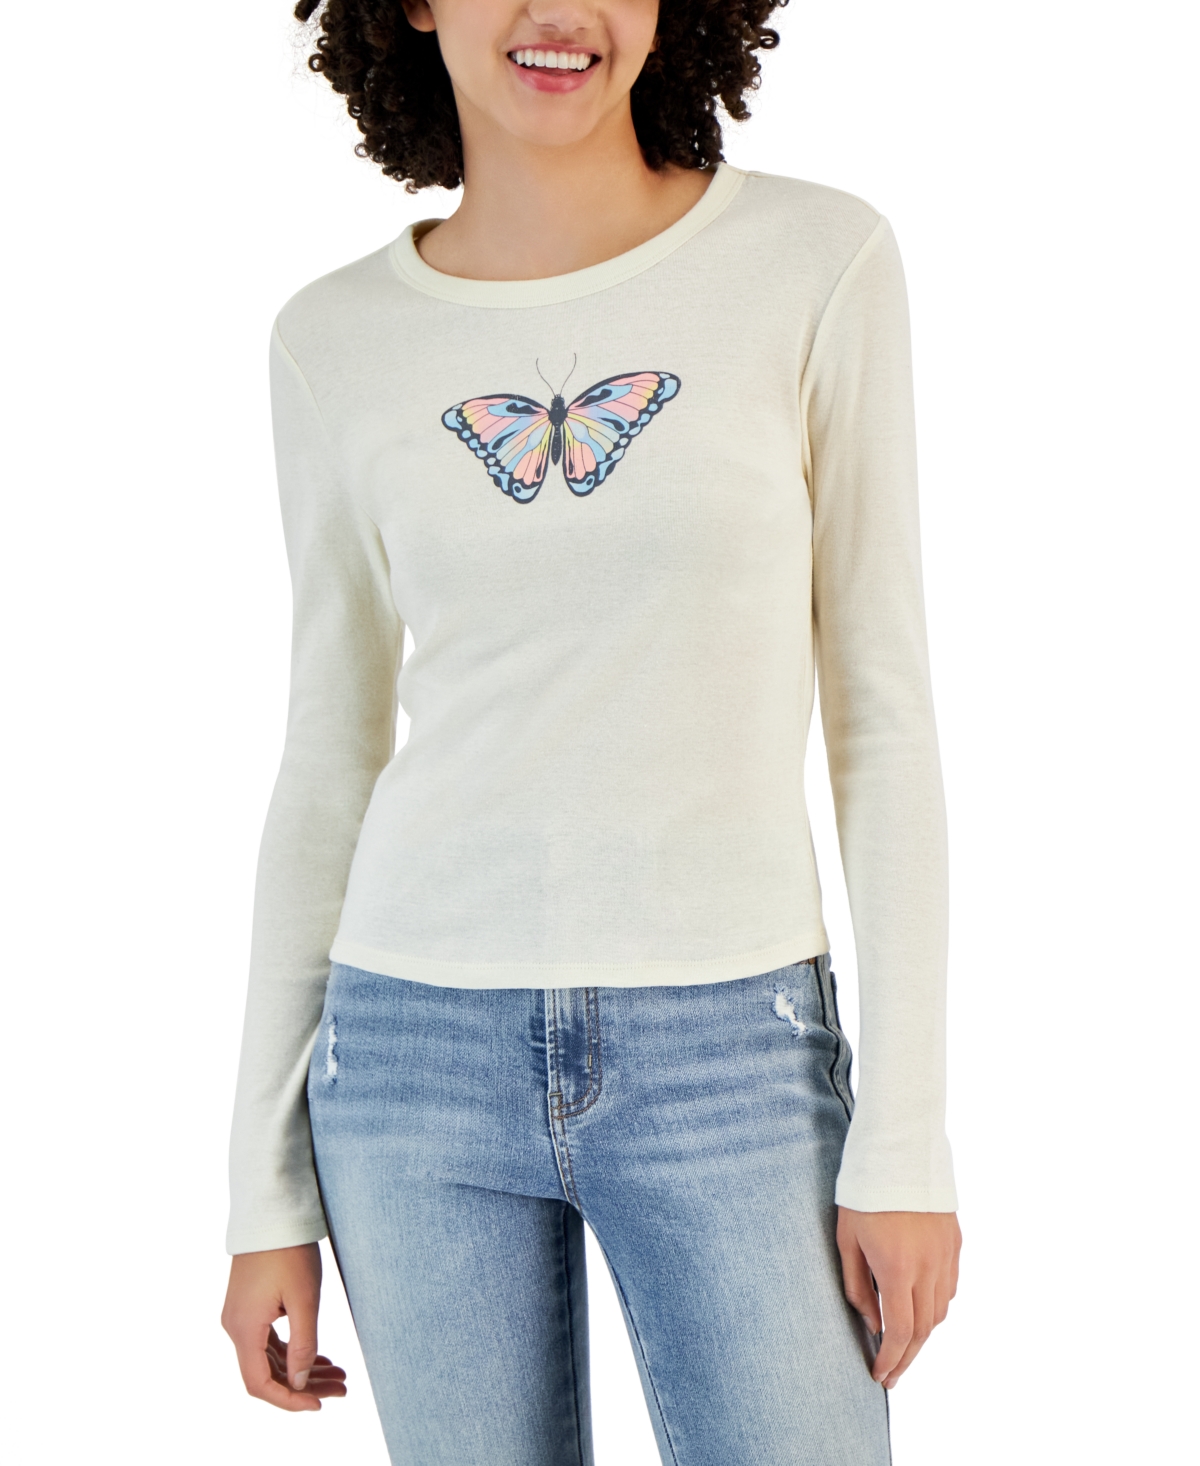 Juniors' Long-Sleeve Crewneck Butterfly Graphic T-Shirt - Antique White